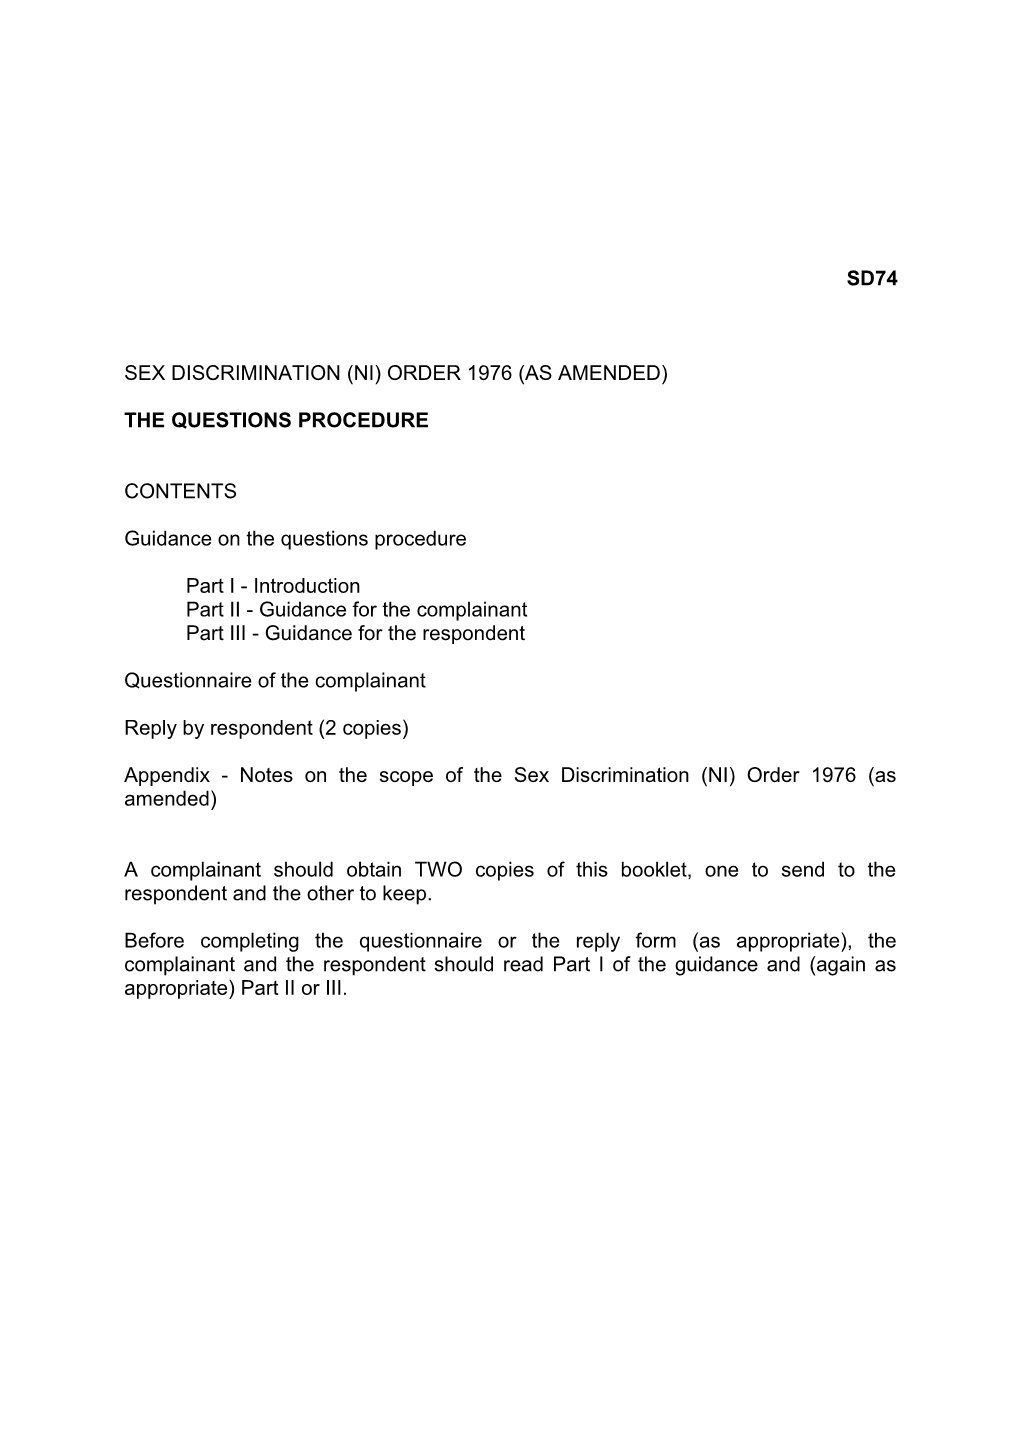 Sex Discrimination (Ni) Order 1976 (As Amended)